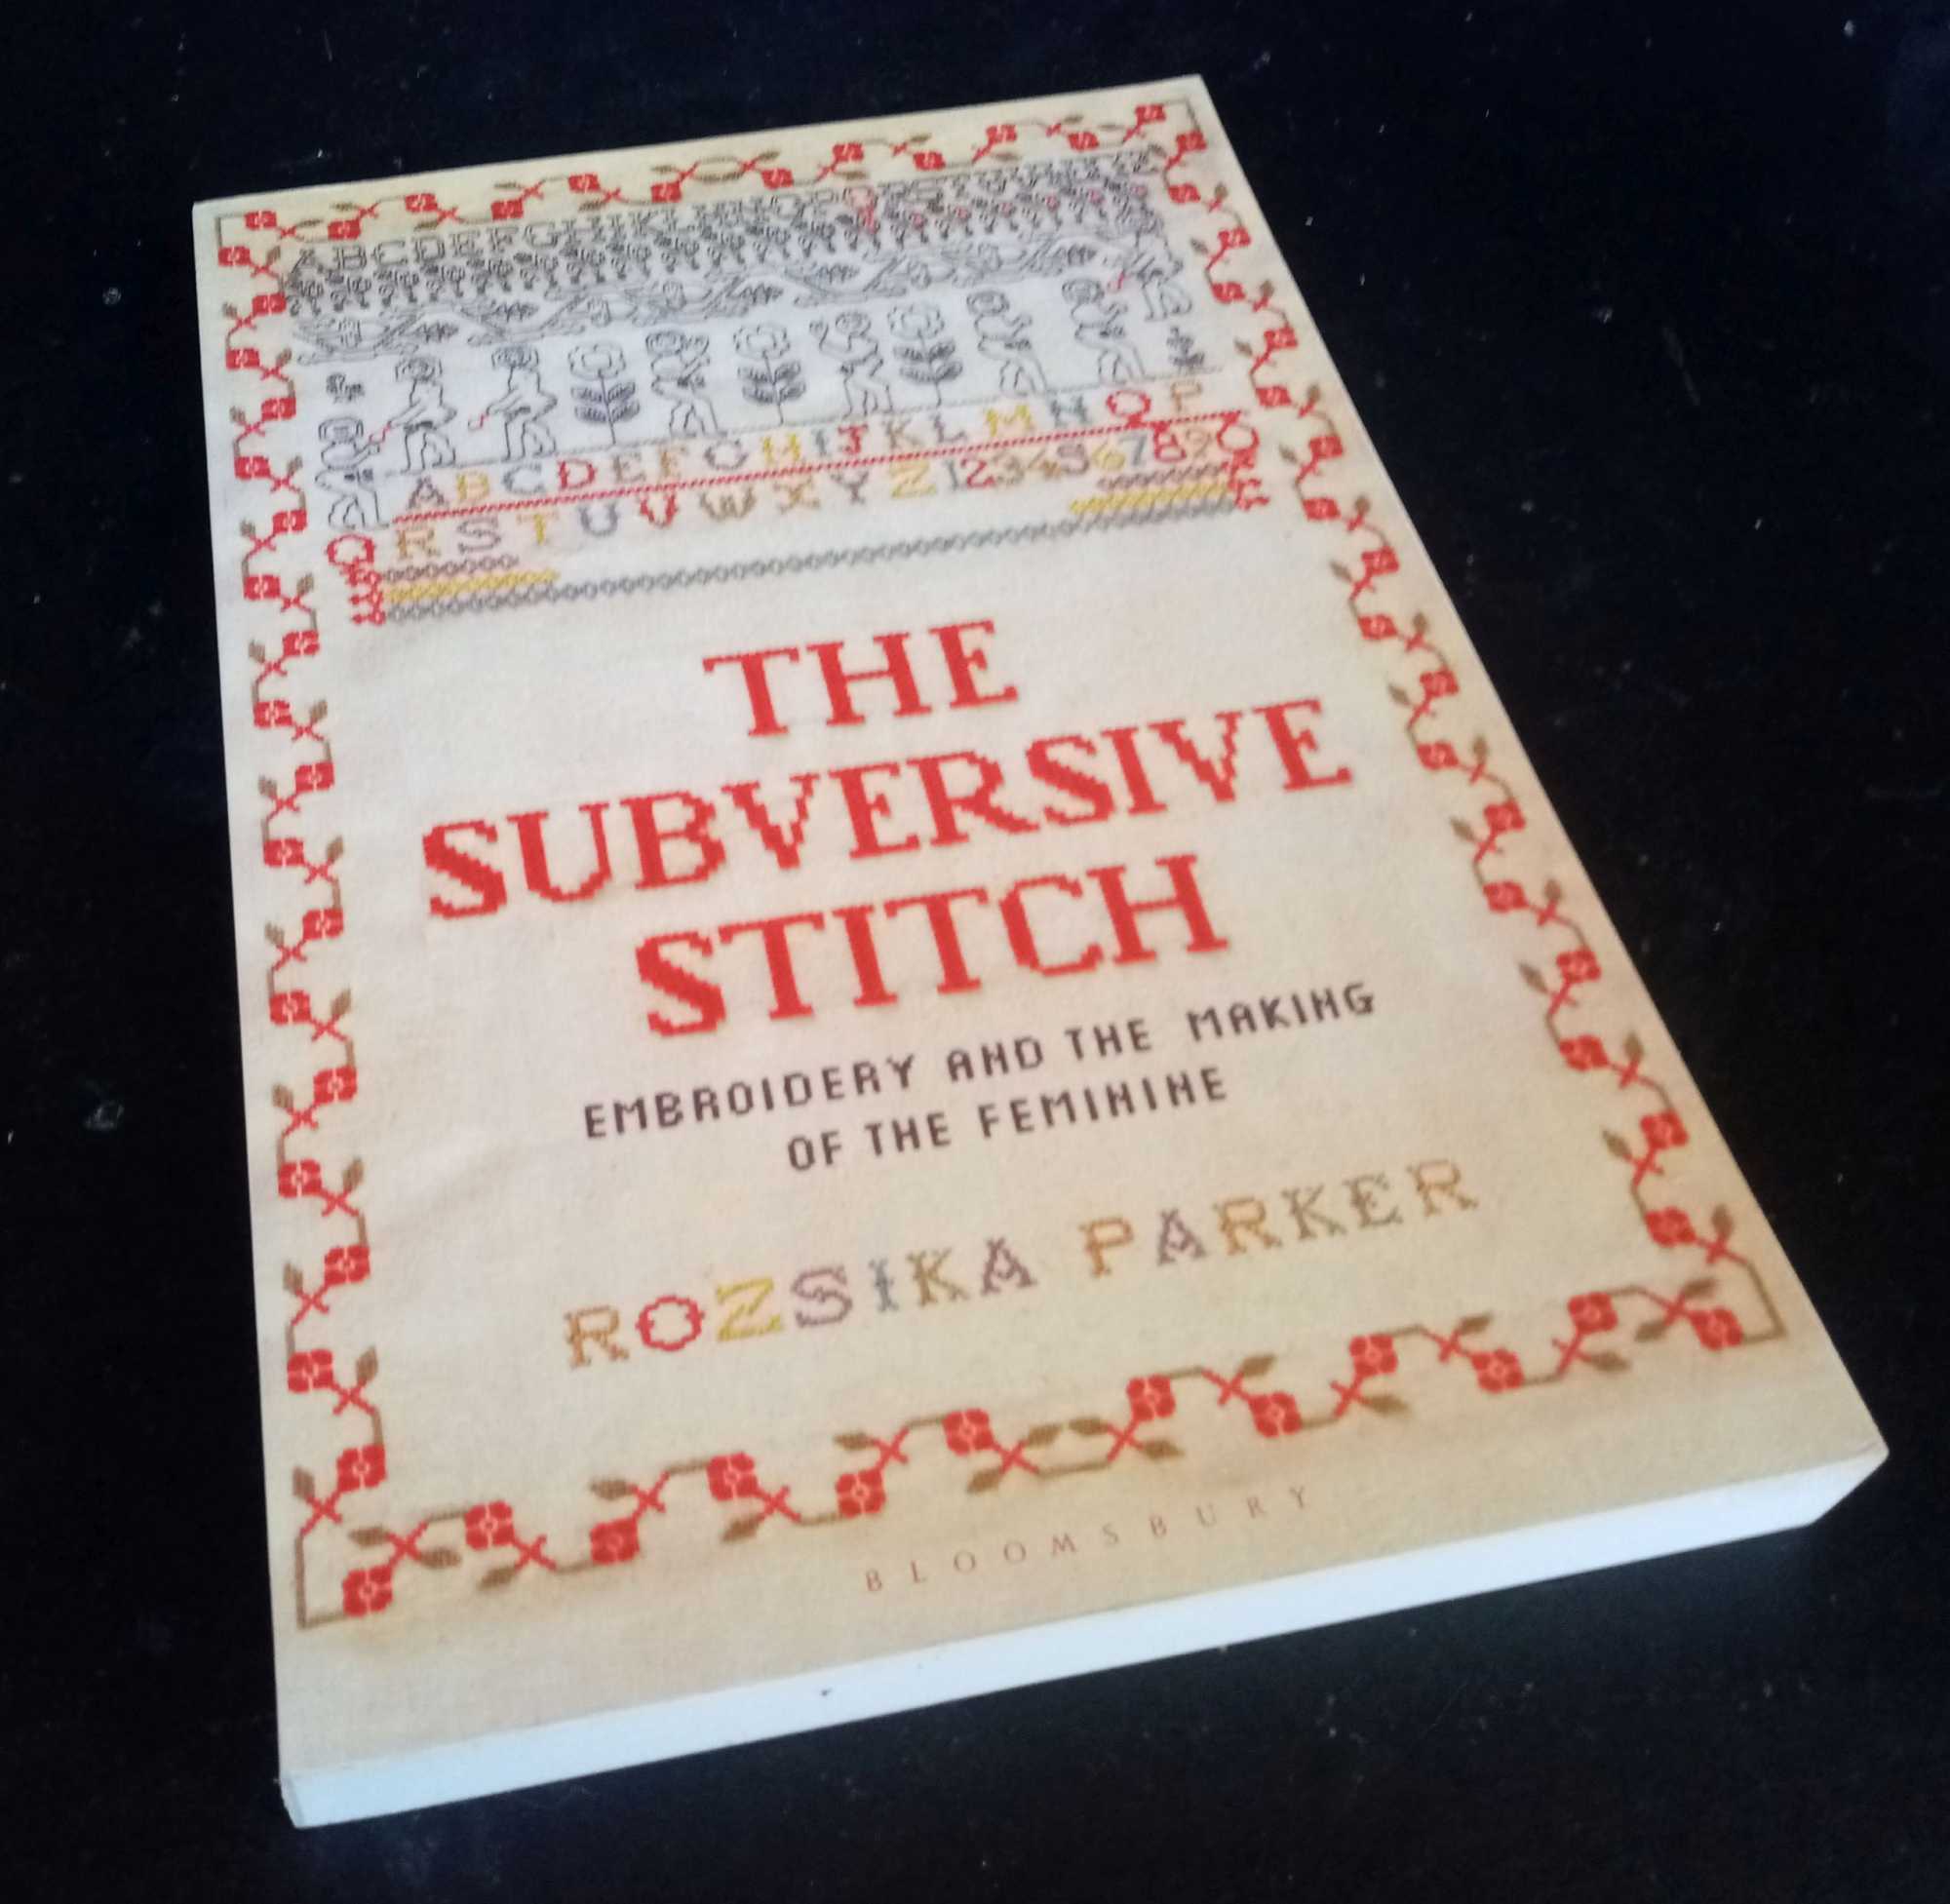 Rozsika Parker - The Subversive Stitch: Embroidery and the Making of the Feminine. New Edition